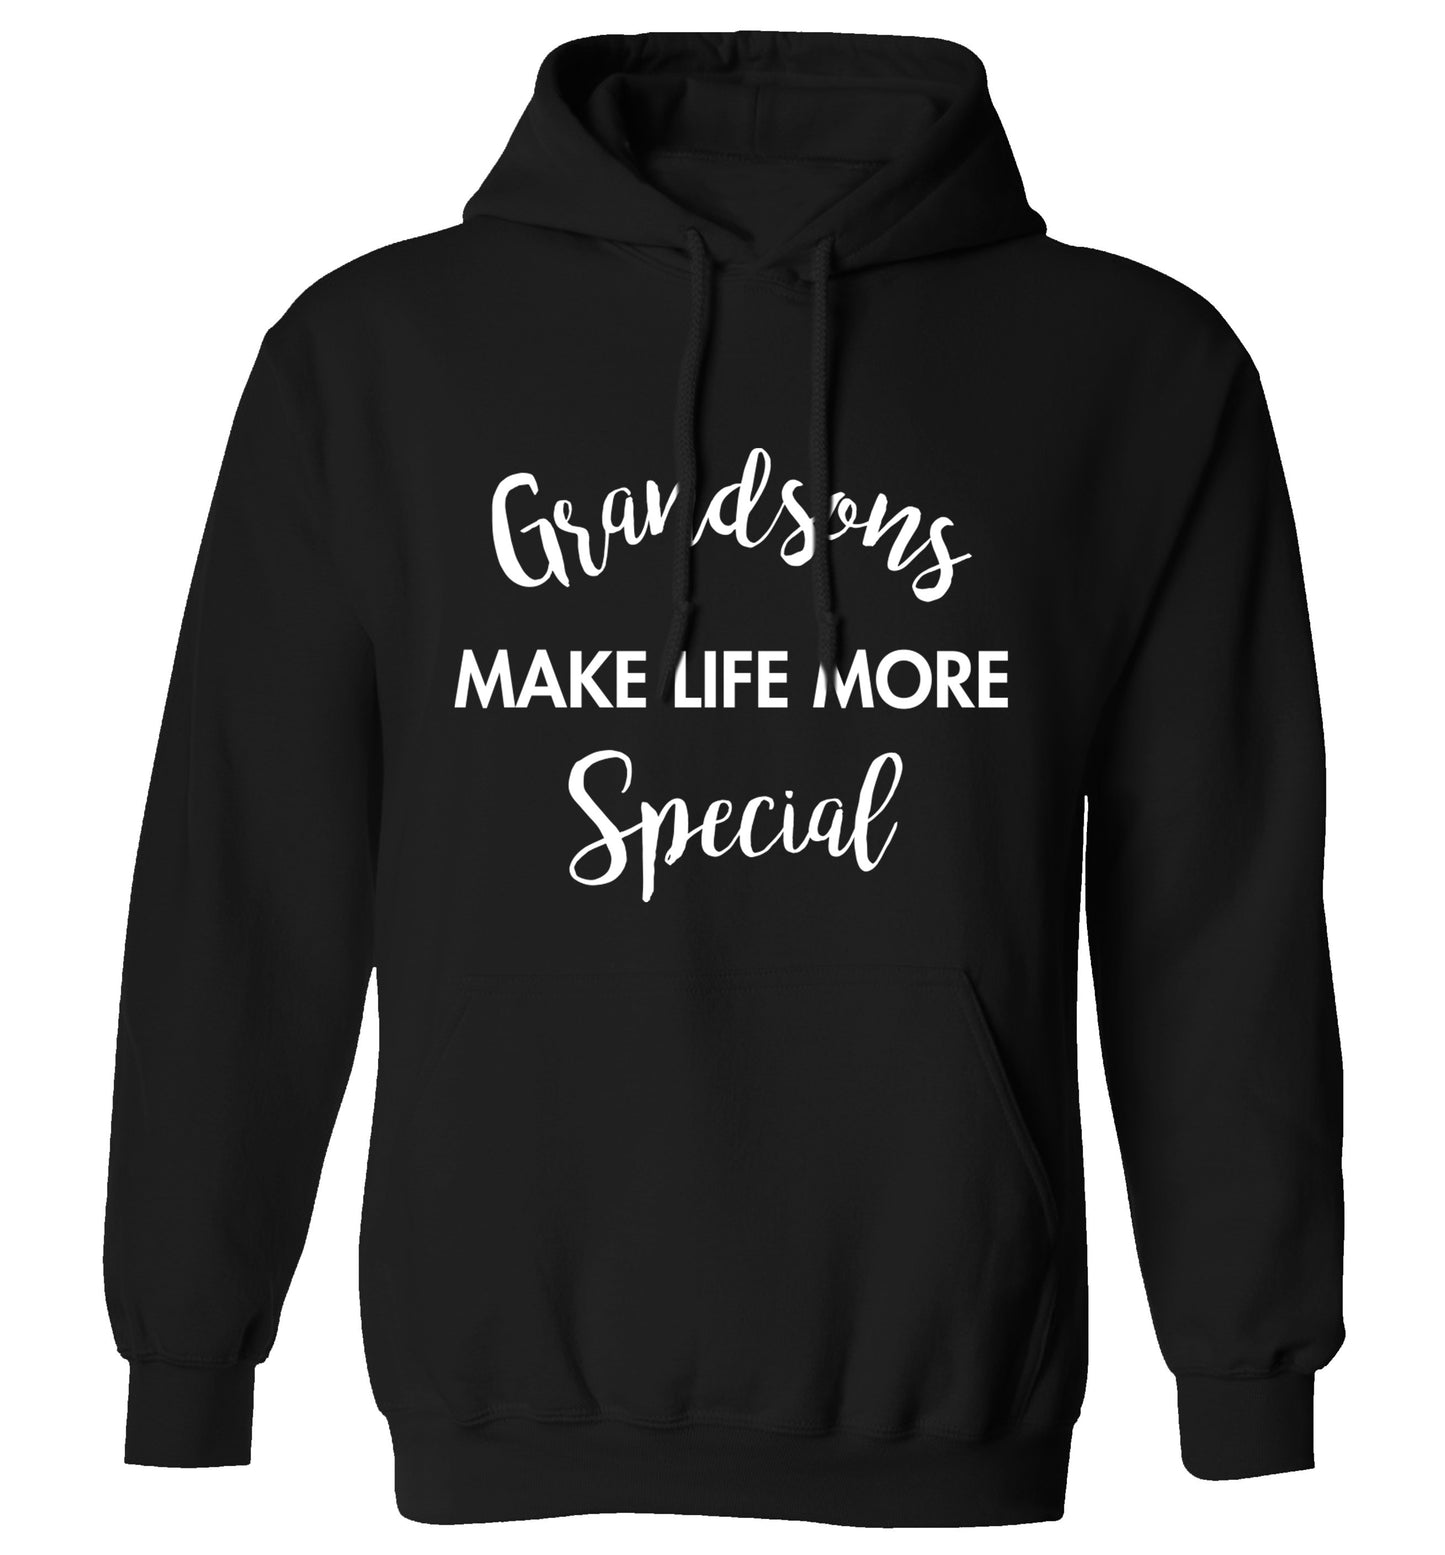 Grandsons make life more special adults unisex black hoodie 2XL